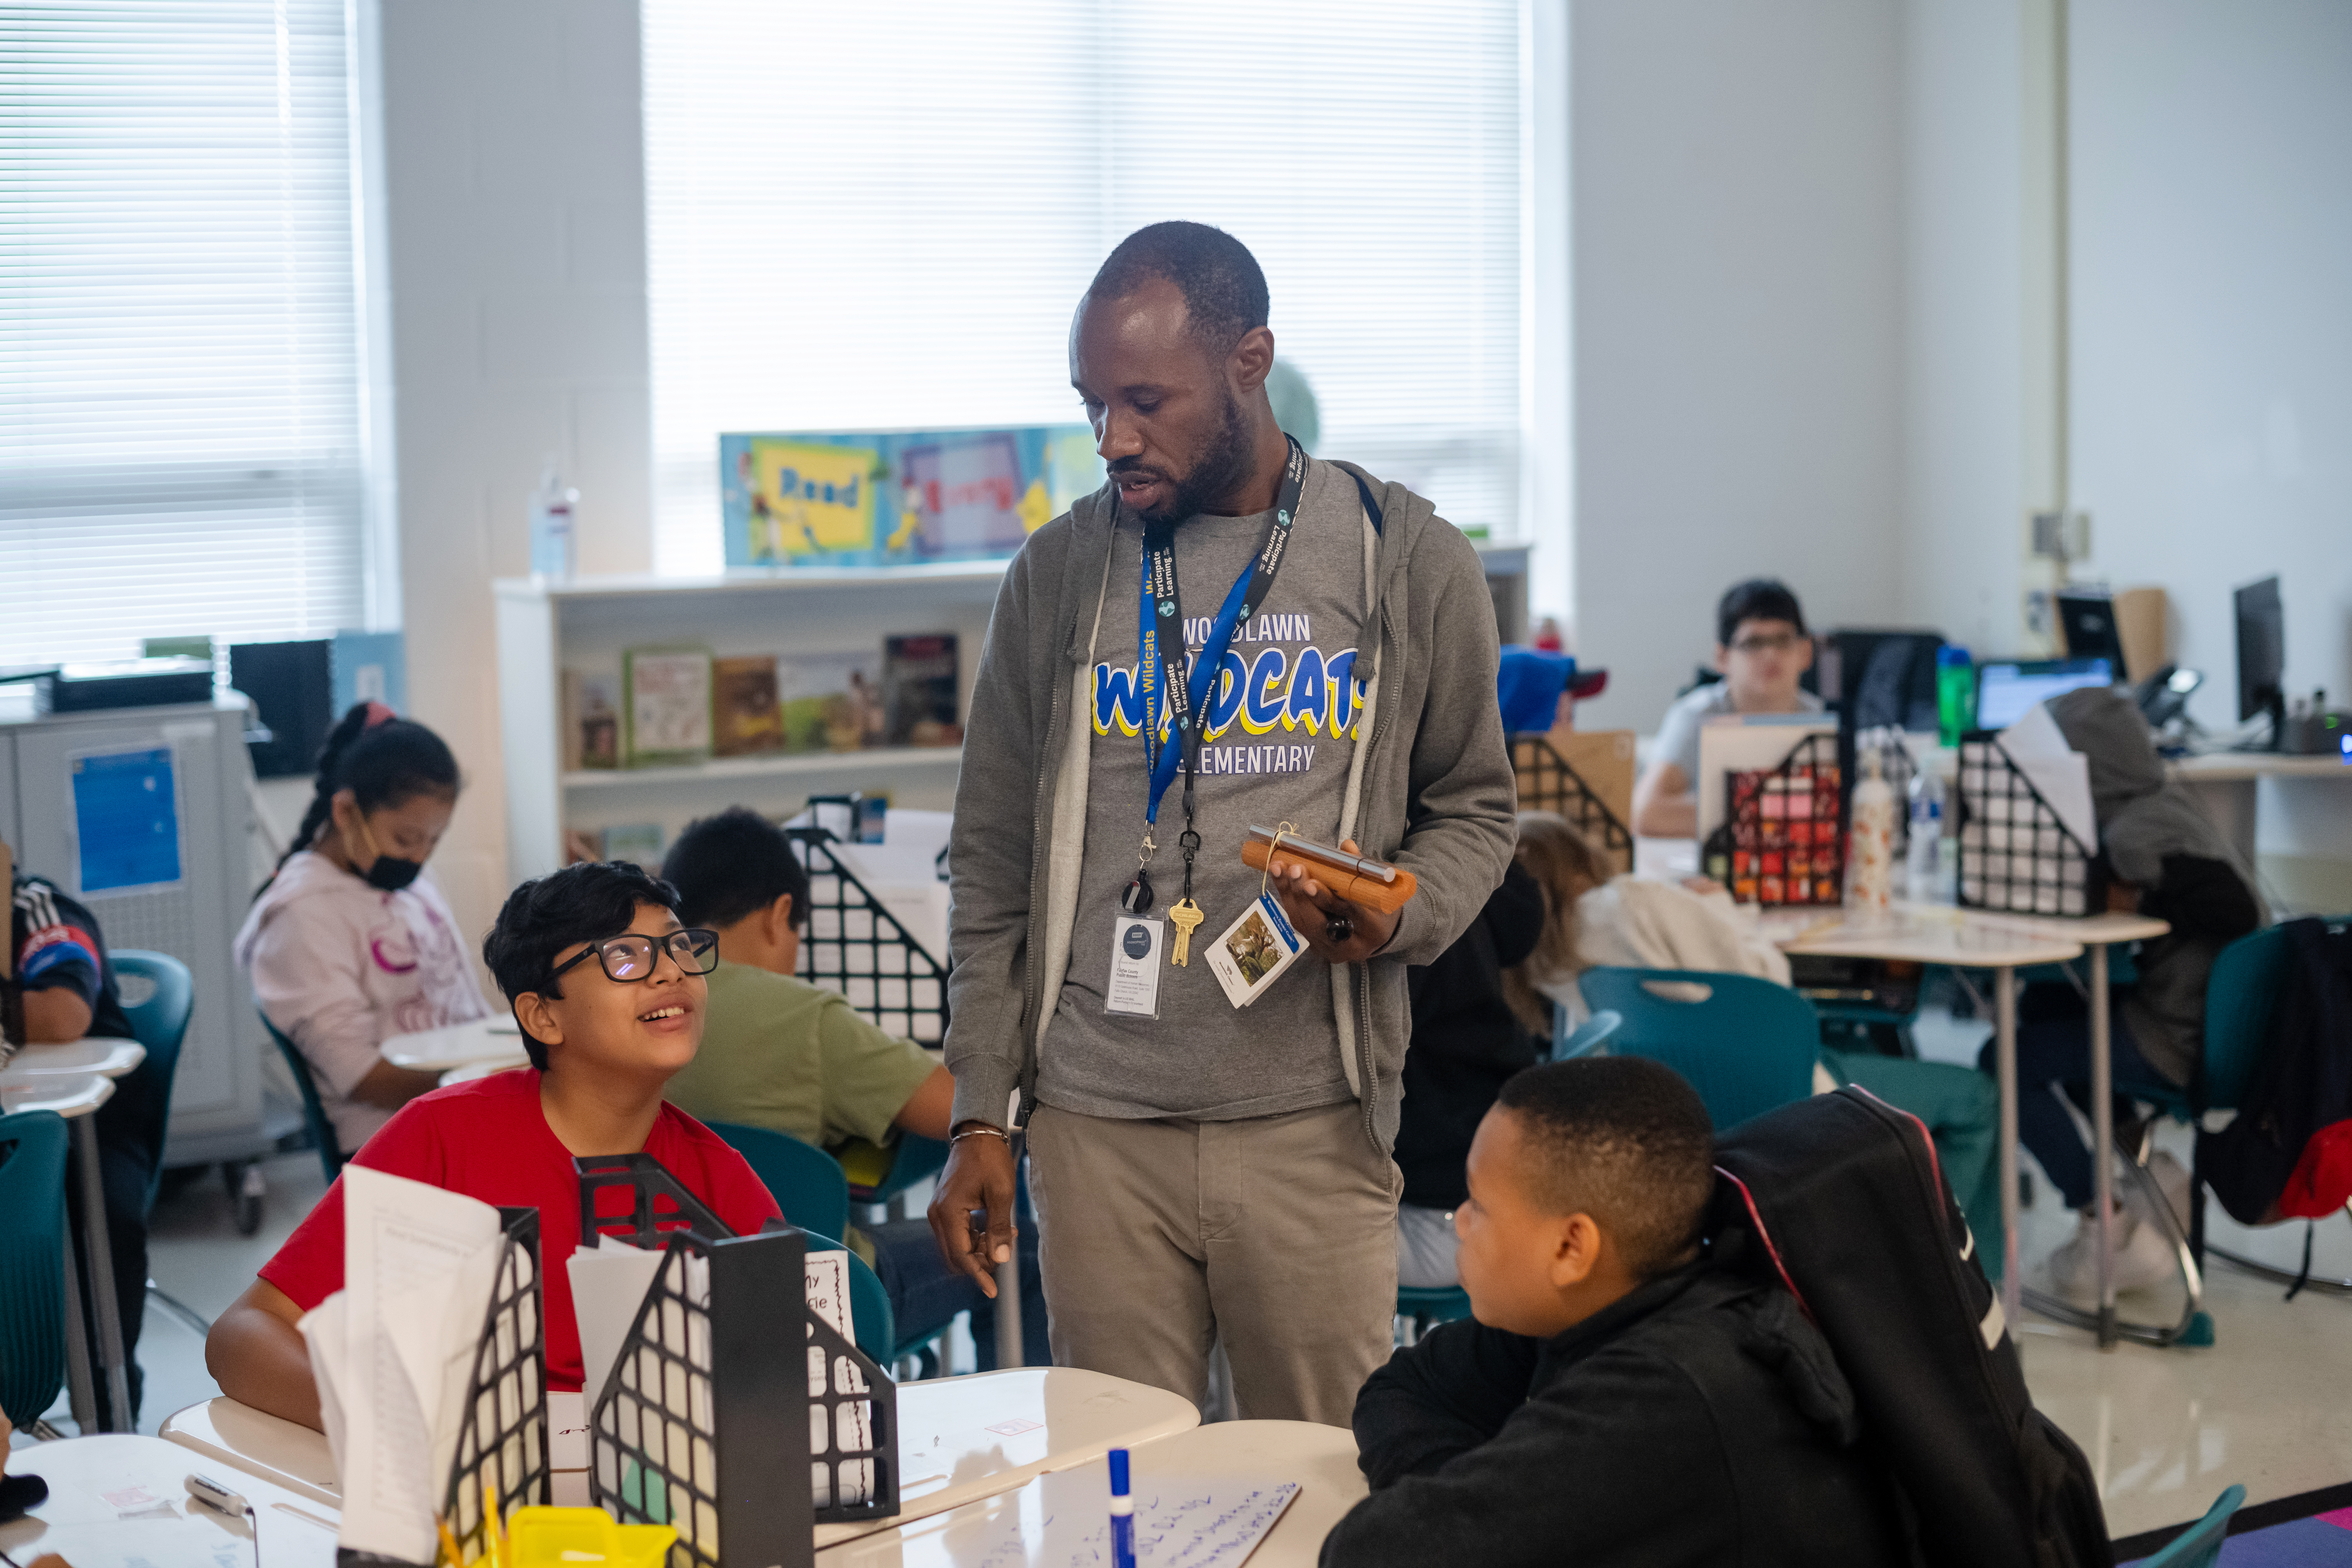 Christopher Jones, a Global Ambassador teacher at Woodlawn Elementary School who has 16 years of teaching experience, engages with students in the classroom.